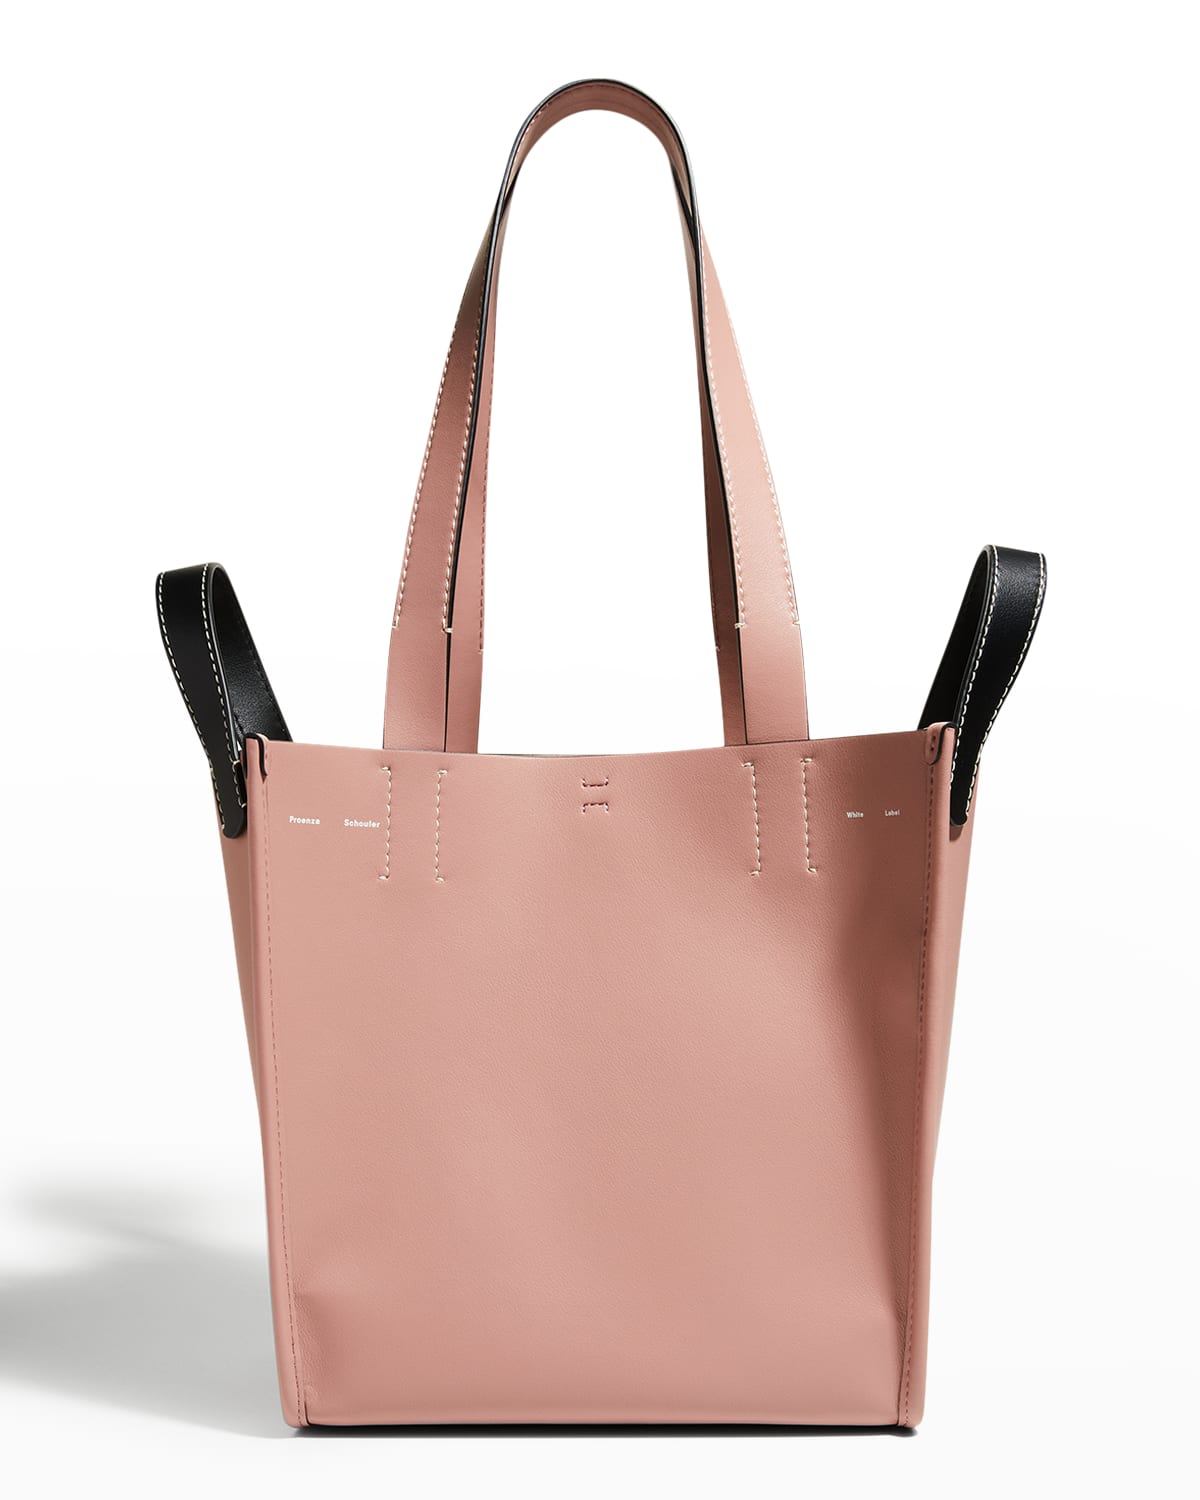 PROENZA SCHOULER WHITE LABEL MERCER LARGE COLORBLOCK LEATHER TOTE BAG